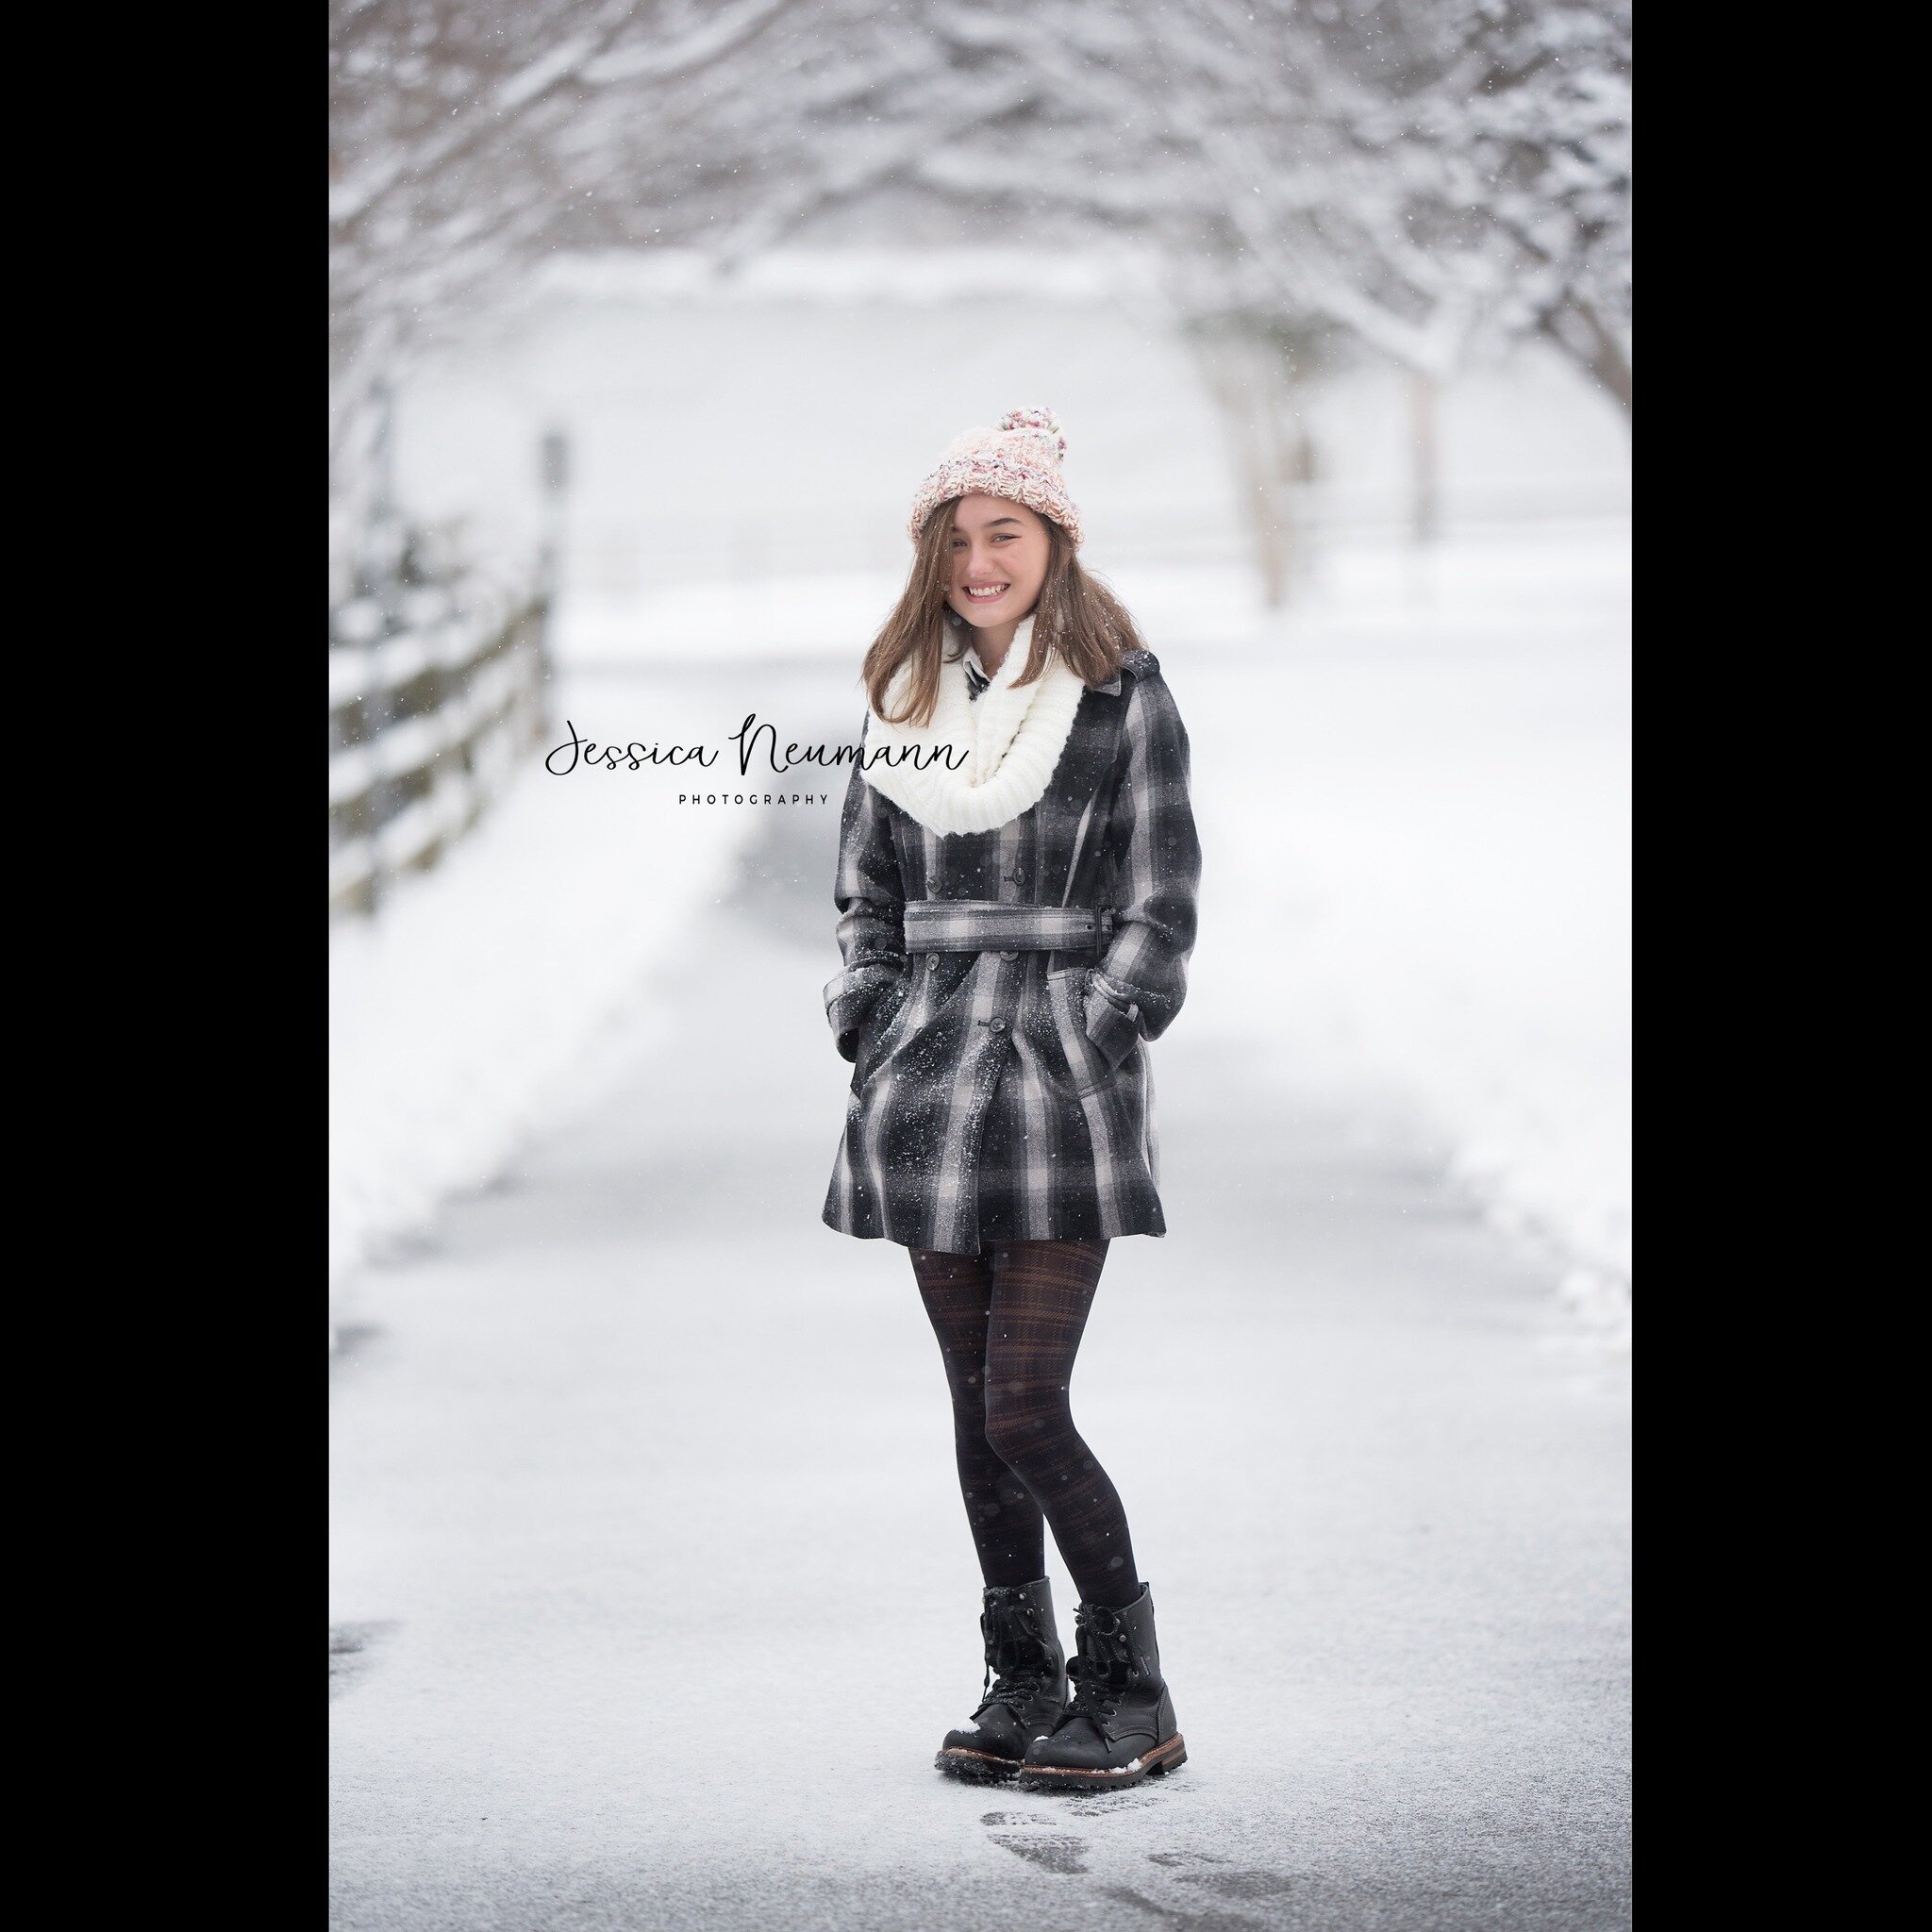 Who says senior pictures have to be taken in the summer time?! Certainly not me! ❄️ 

If you are interested in booking a session, head to my website for more examples of my work; Click the &ldquo;contact&rdquo; tab for booking details: www.jessicaneu